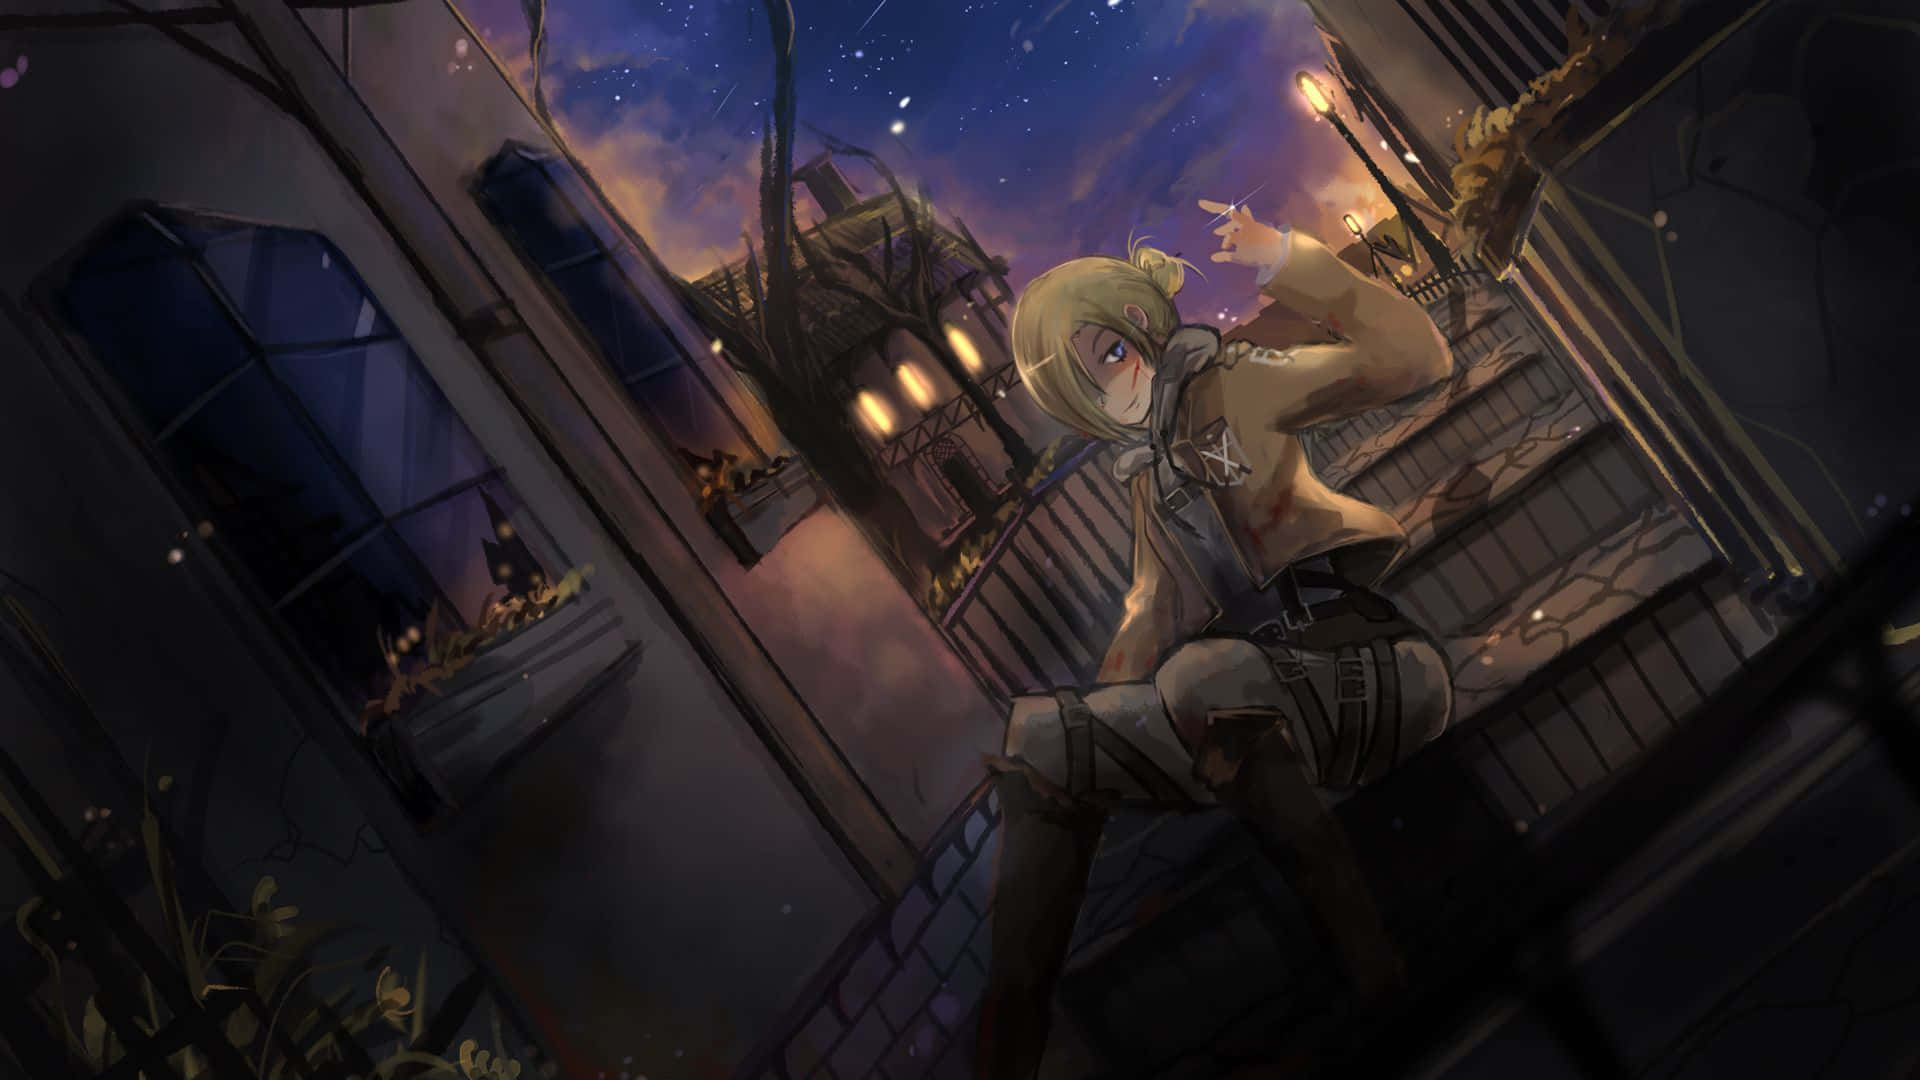 Annie Leonhart shows off her strength in this stunning anime wallpaper Wallpaper